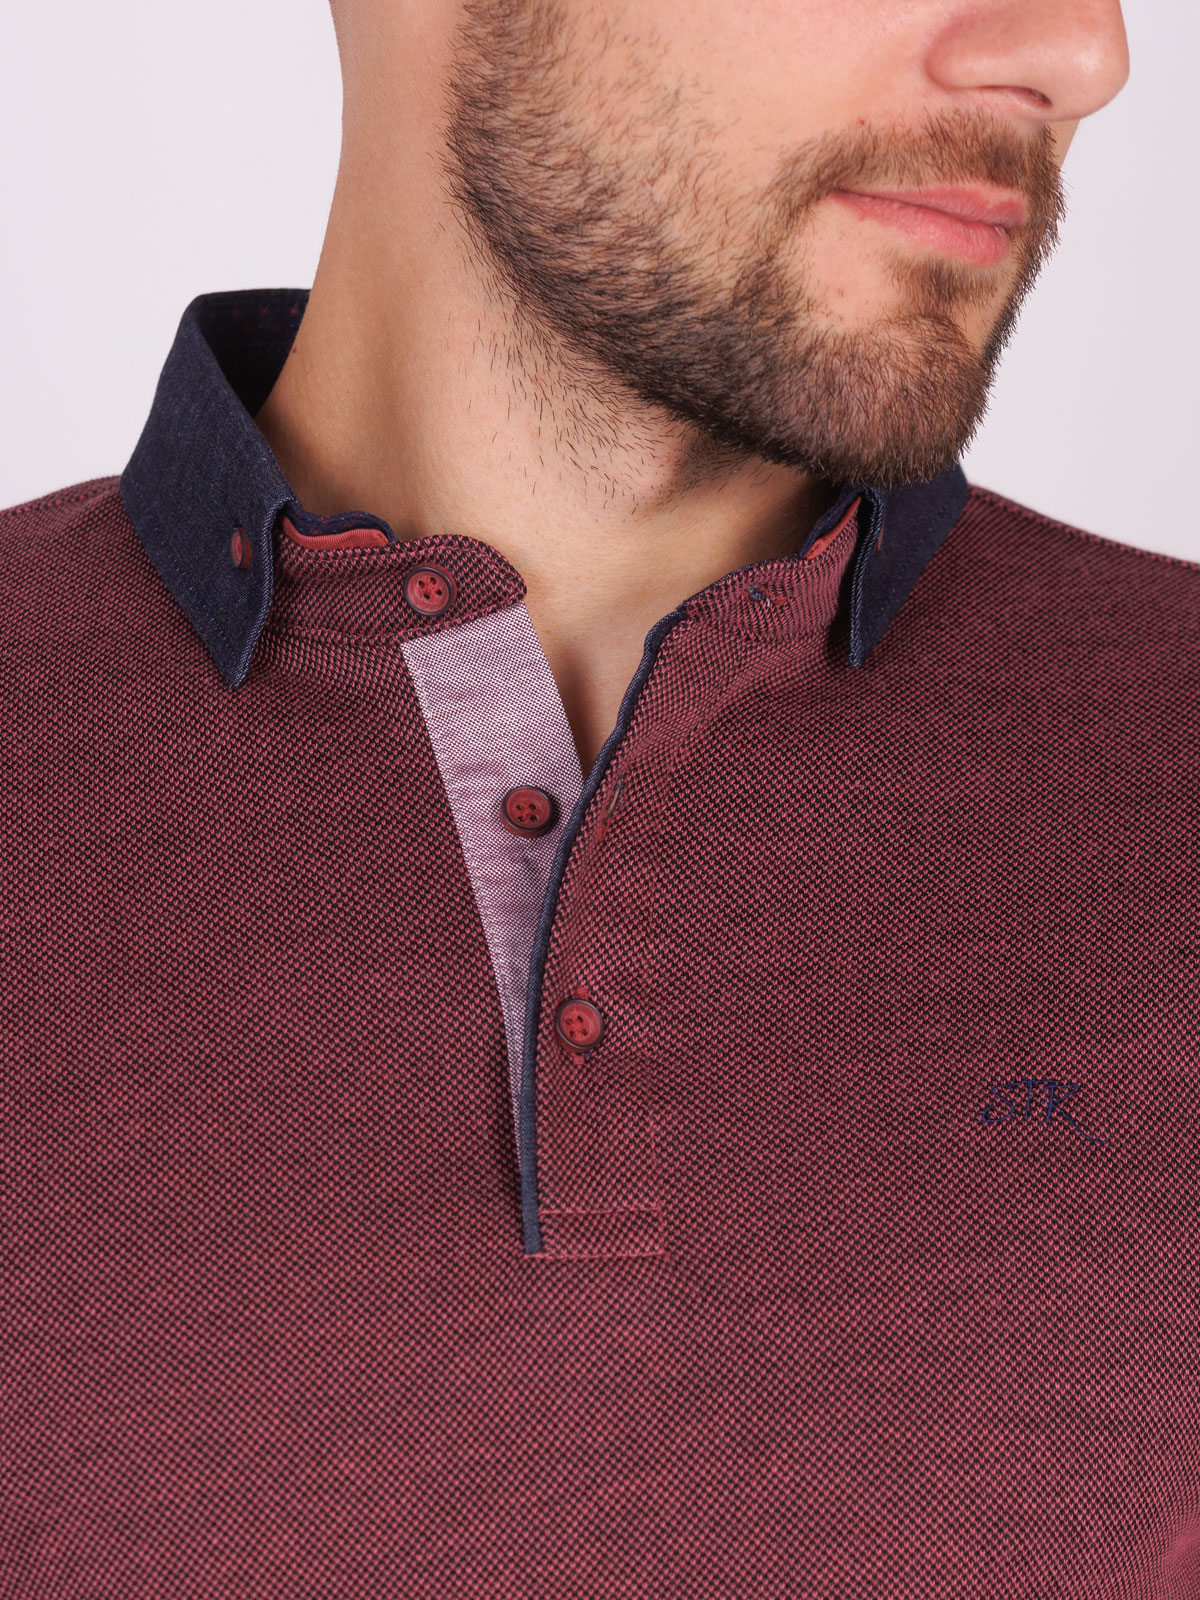 Mens blouse in raspberry color - 18273 € 35.43 img3